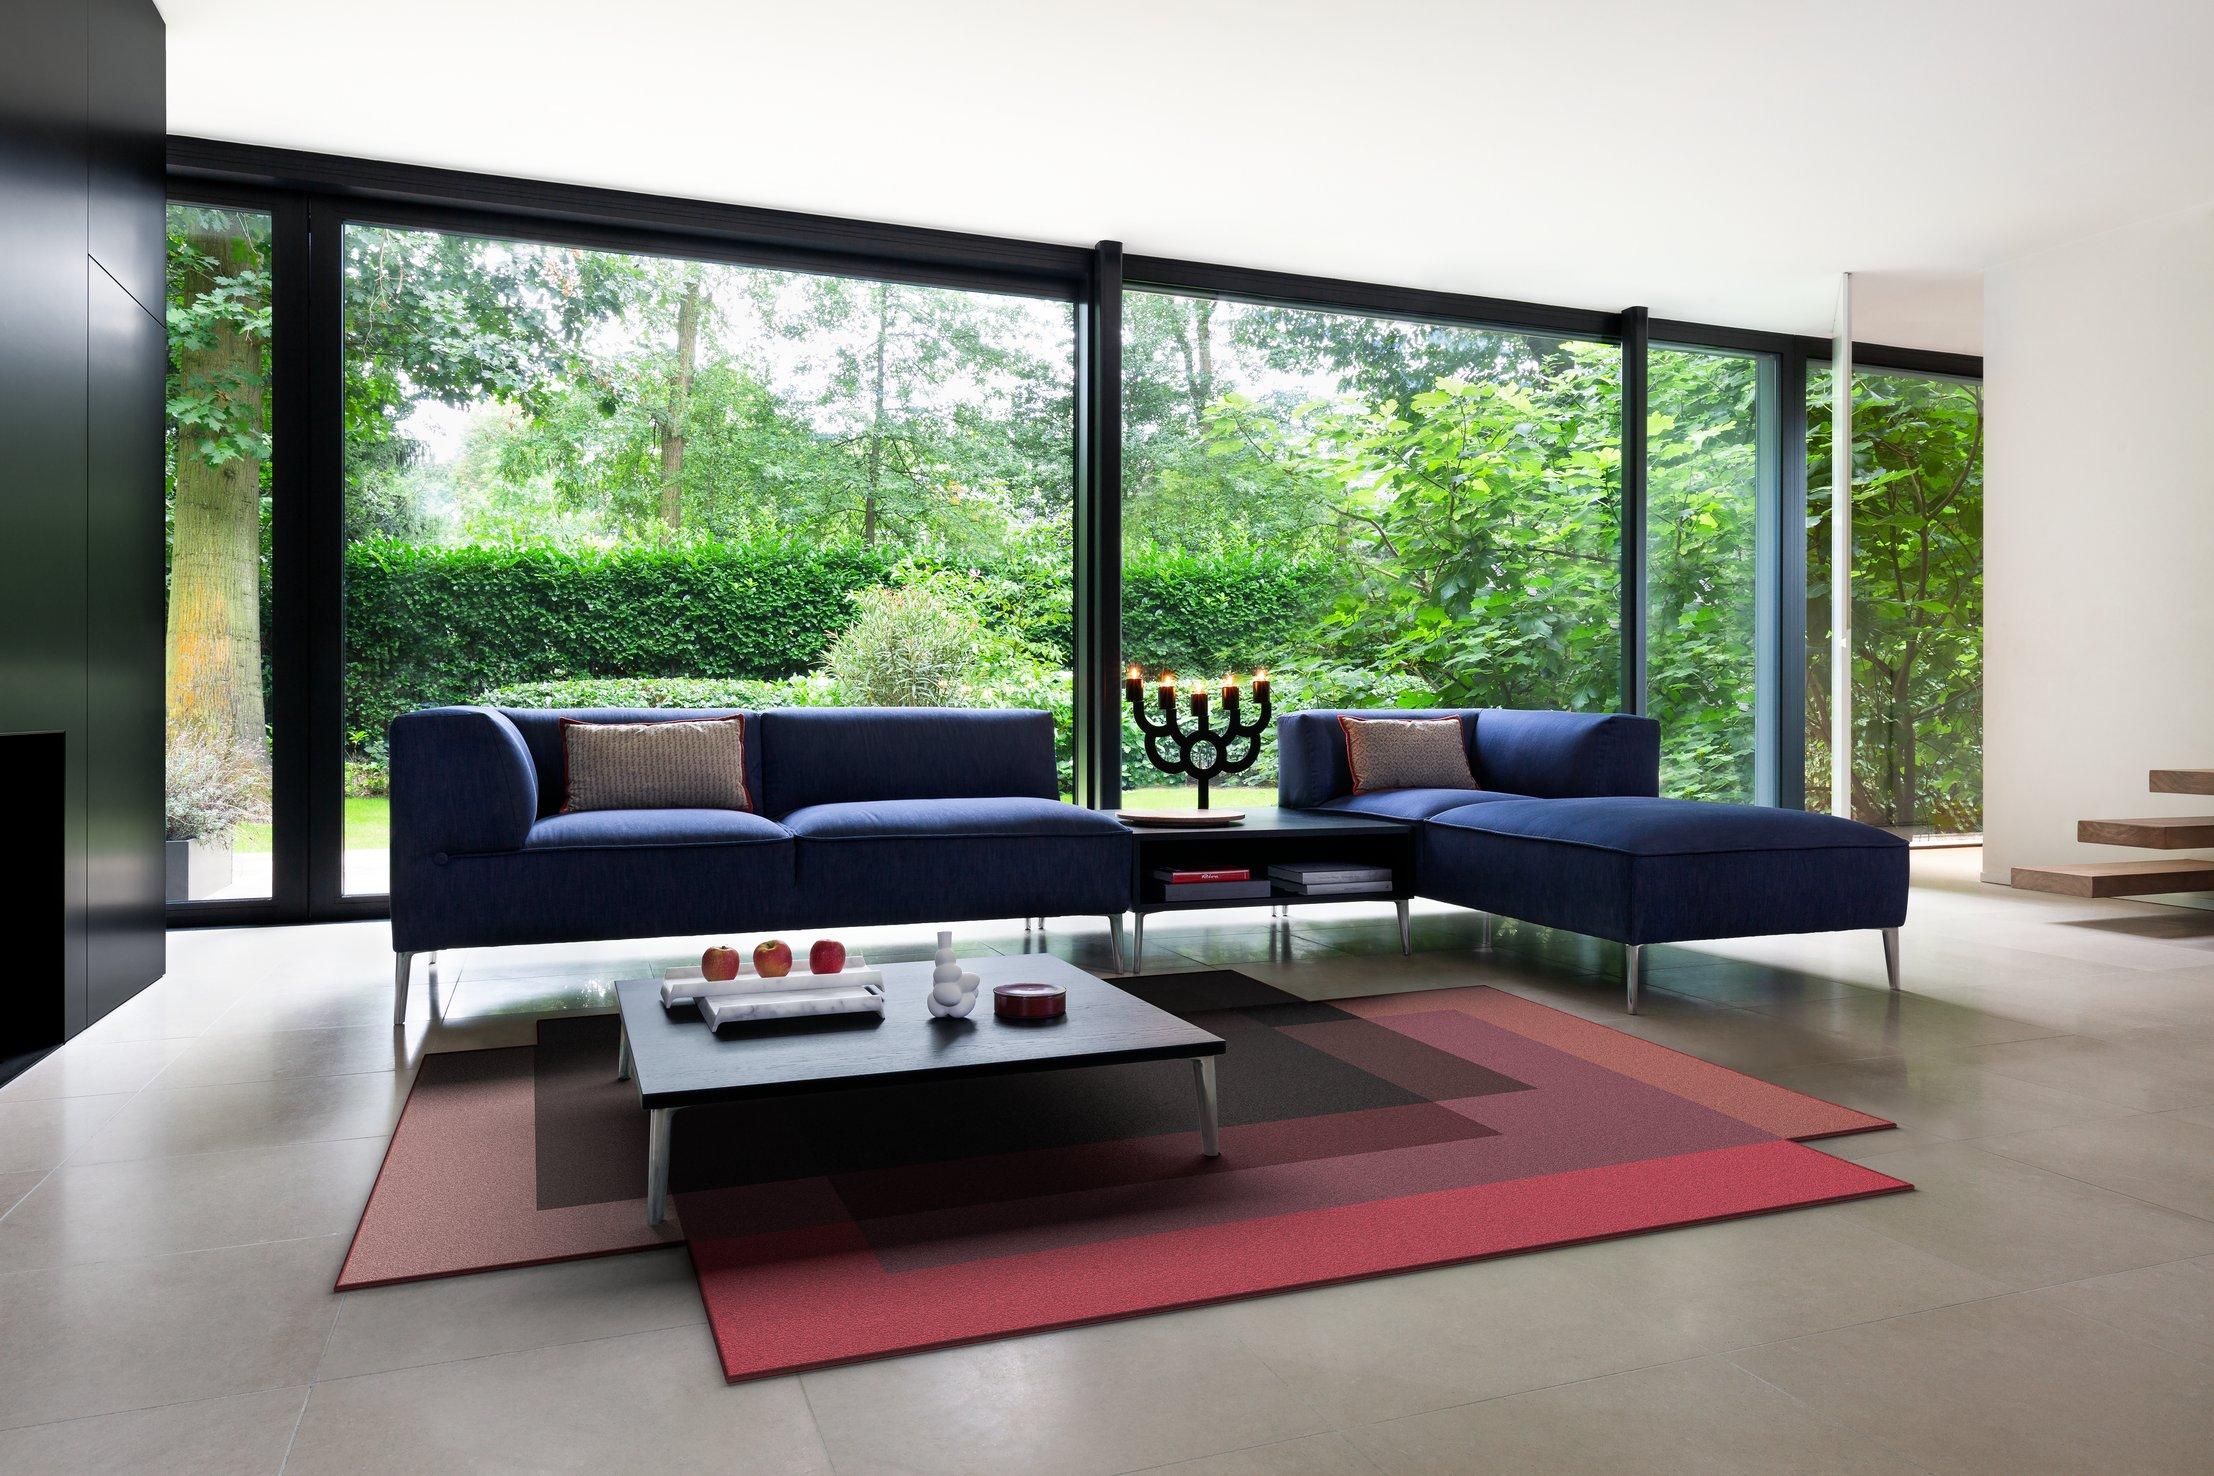 Modern Moooi Sectional Sofa So Good in Shade Raw Umber Foam with Polished Aluminum Feet For Sale